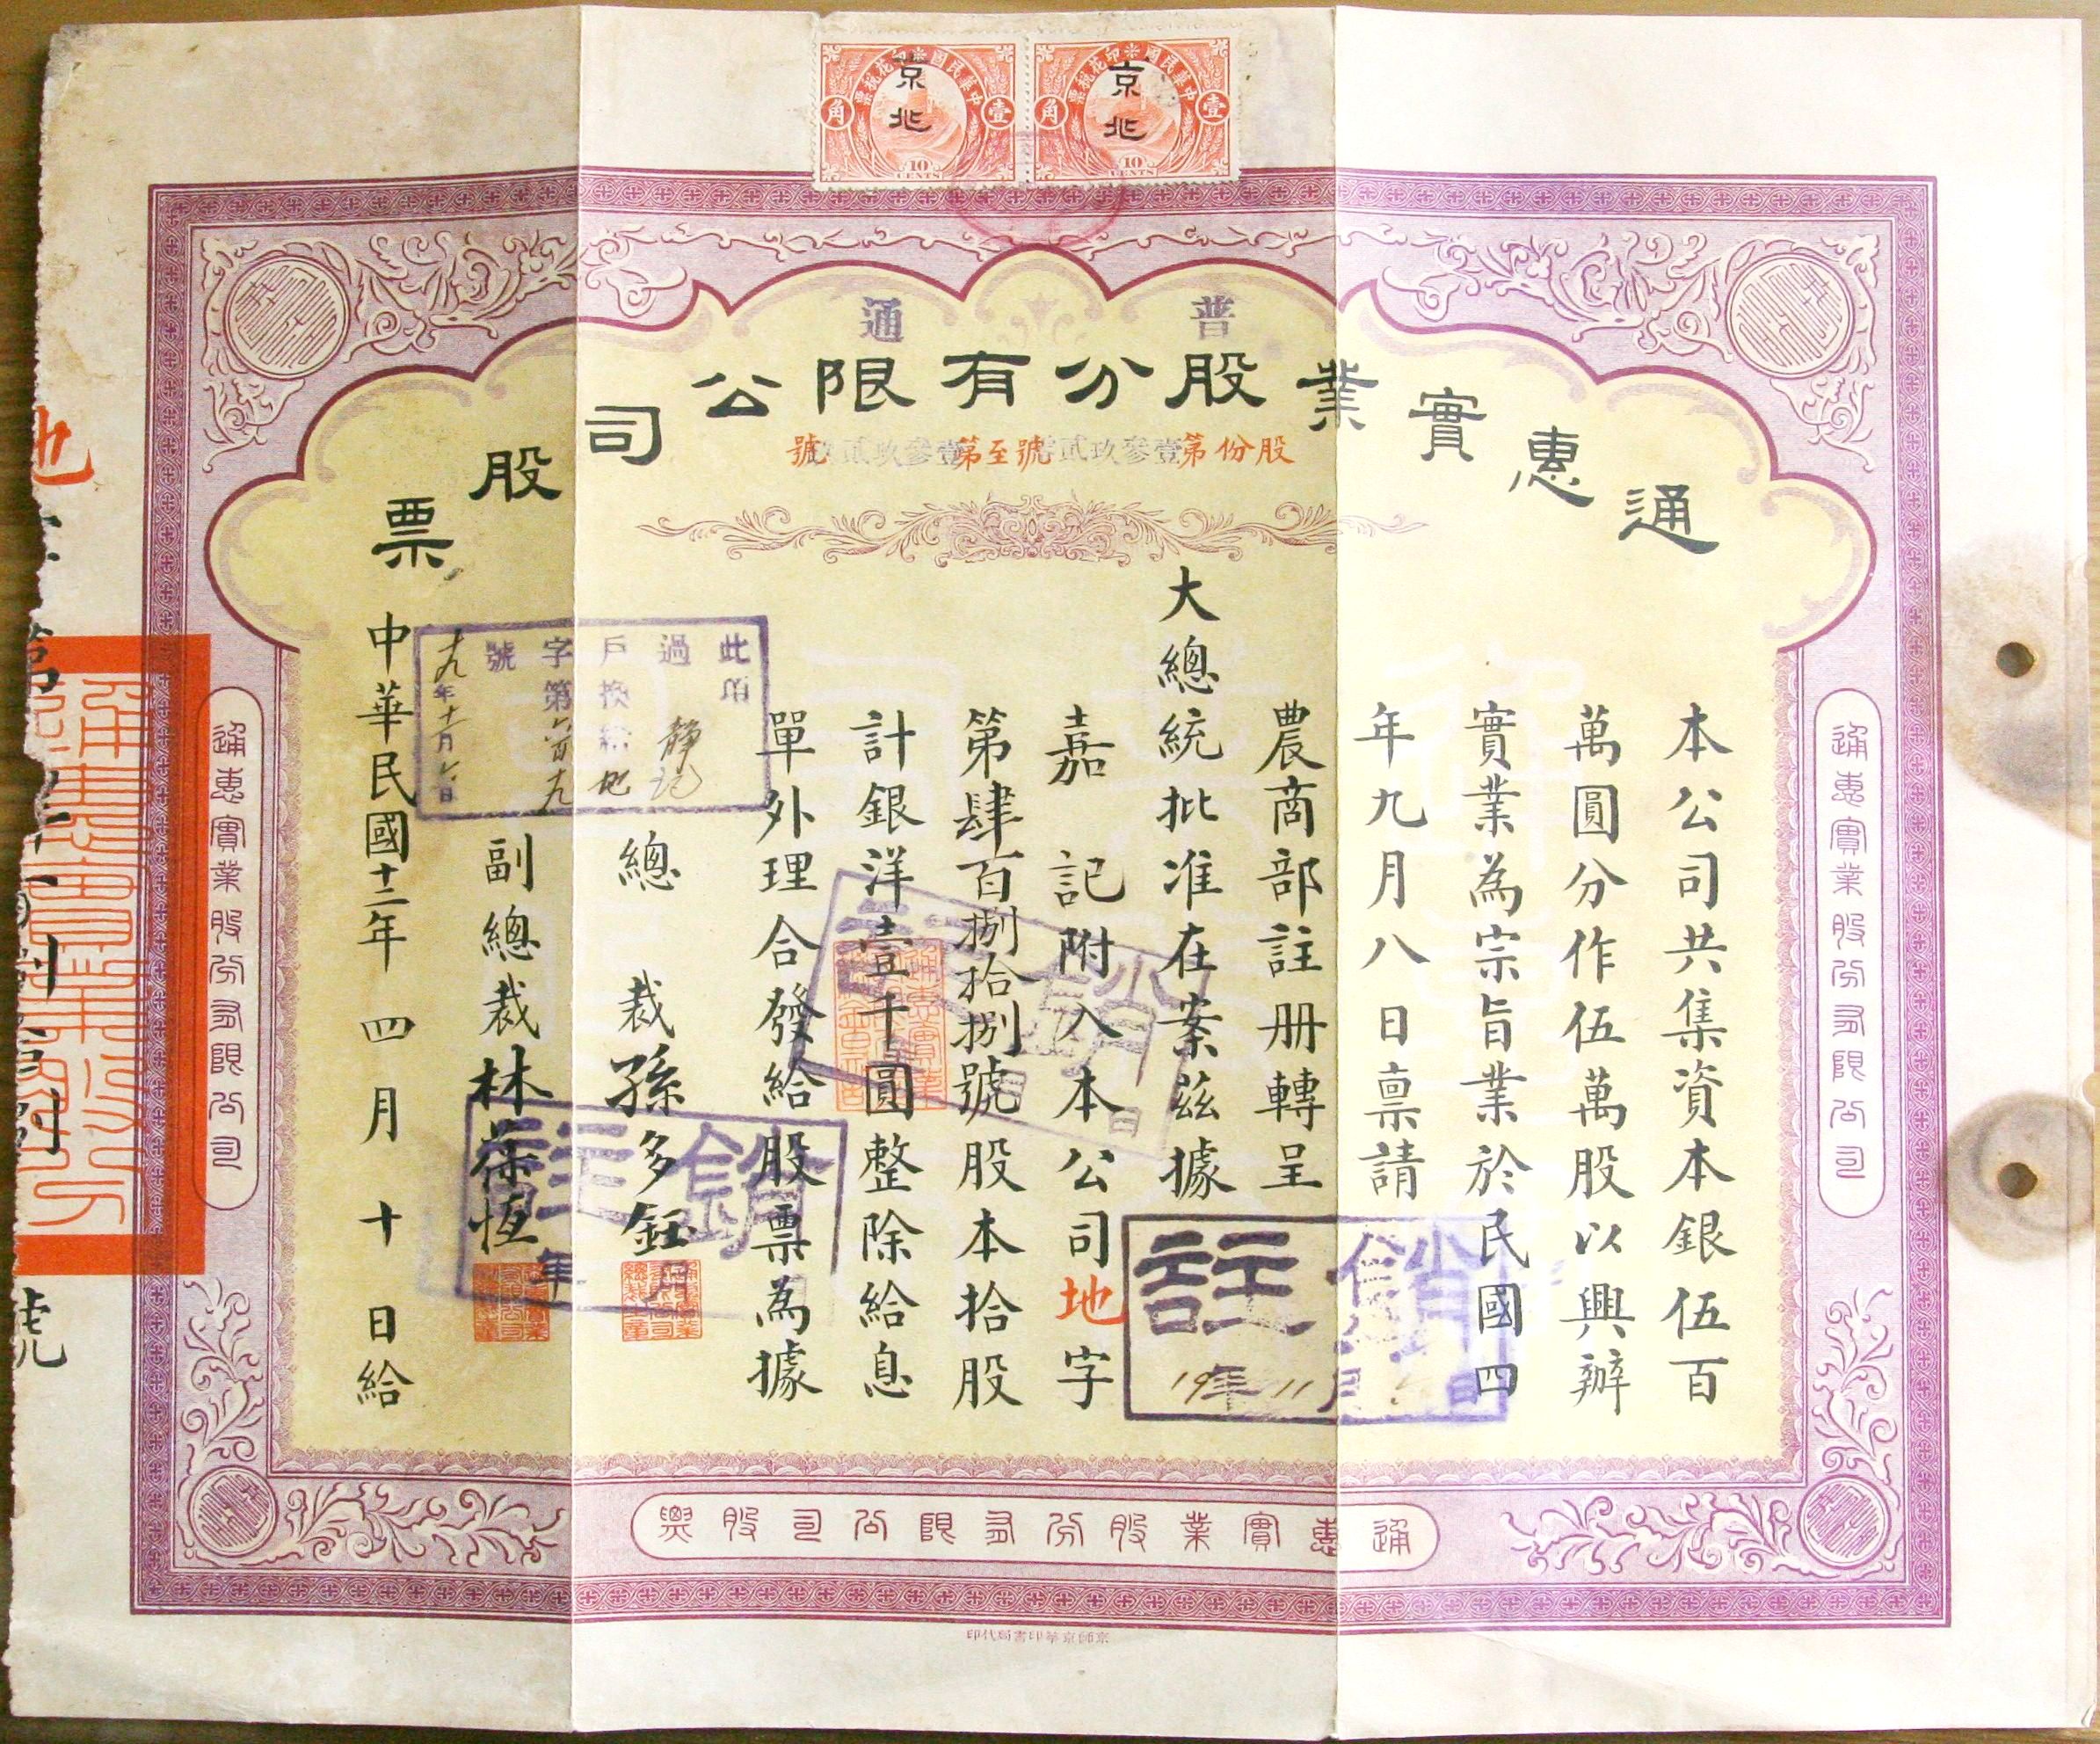 S0171, Tonghui Industries Co., Ltd, Stock of 10 Standard Shares, China 1923